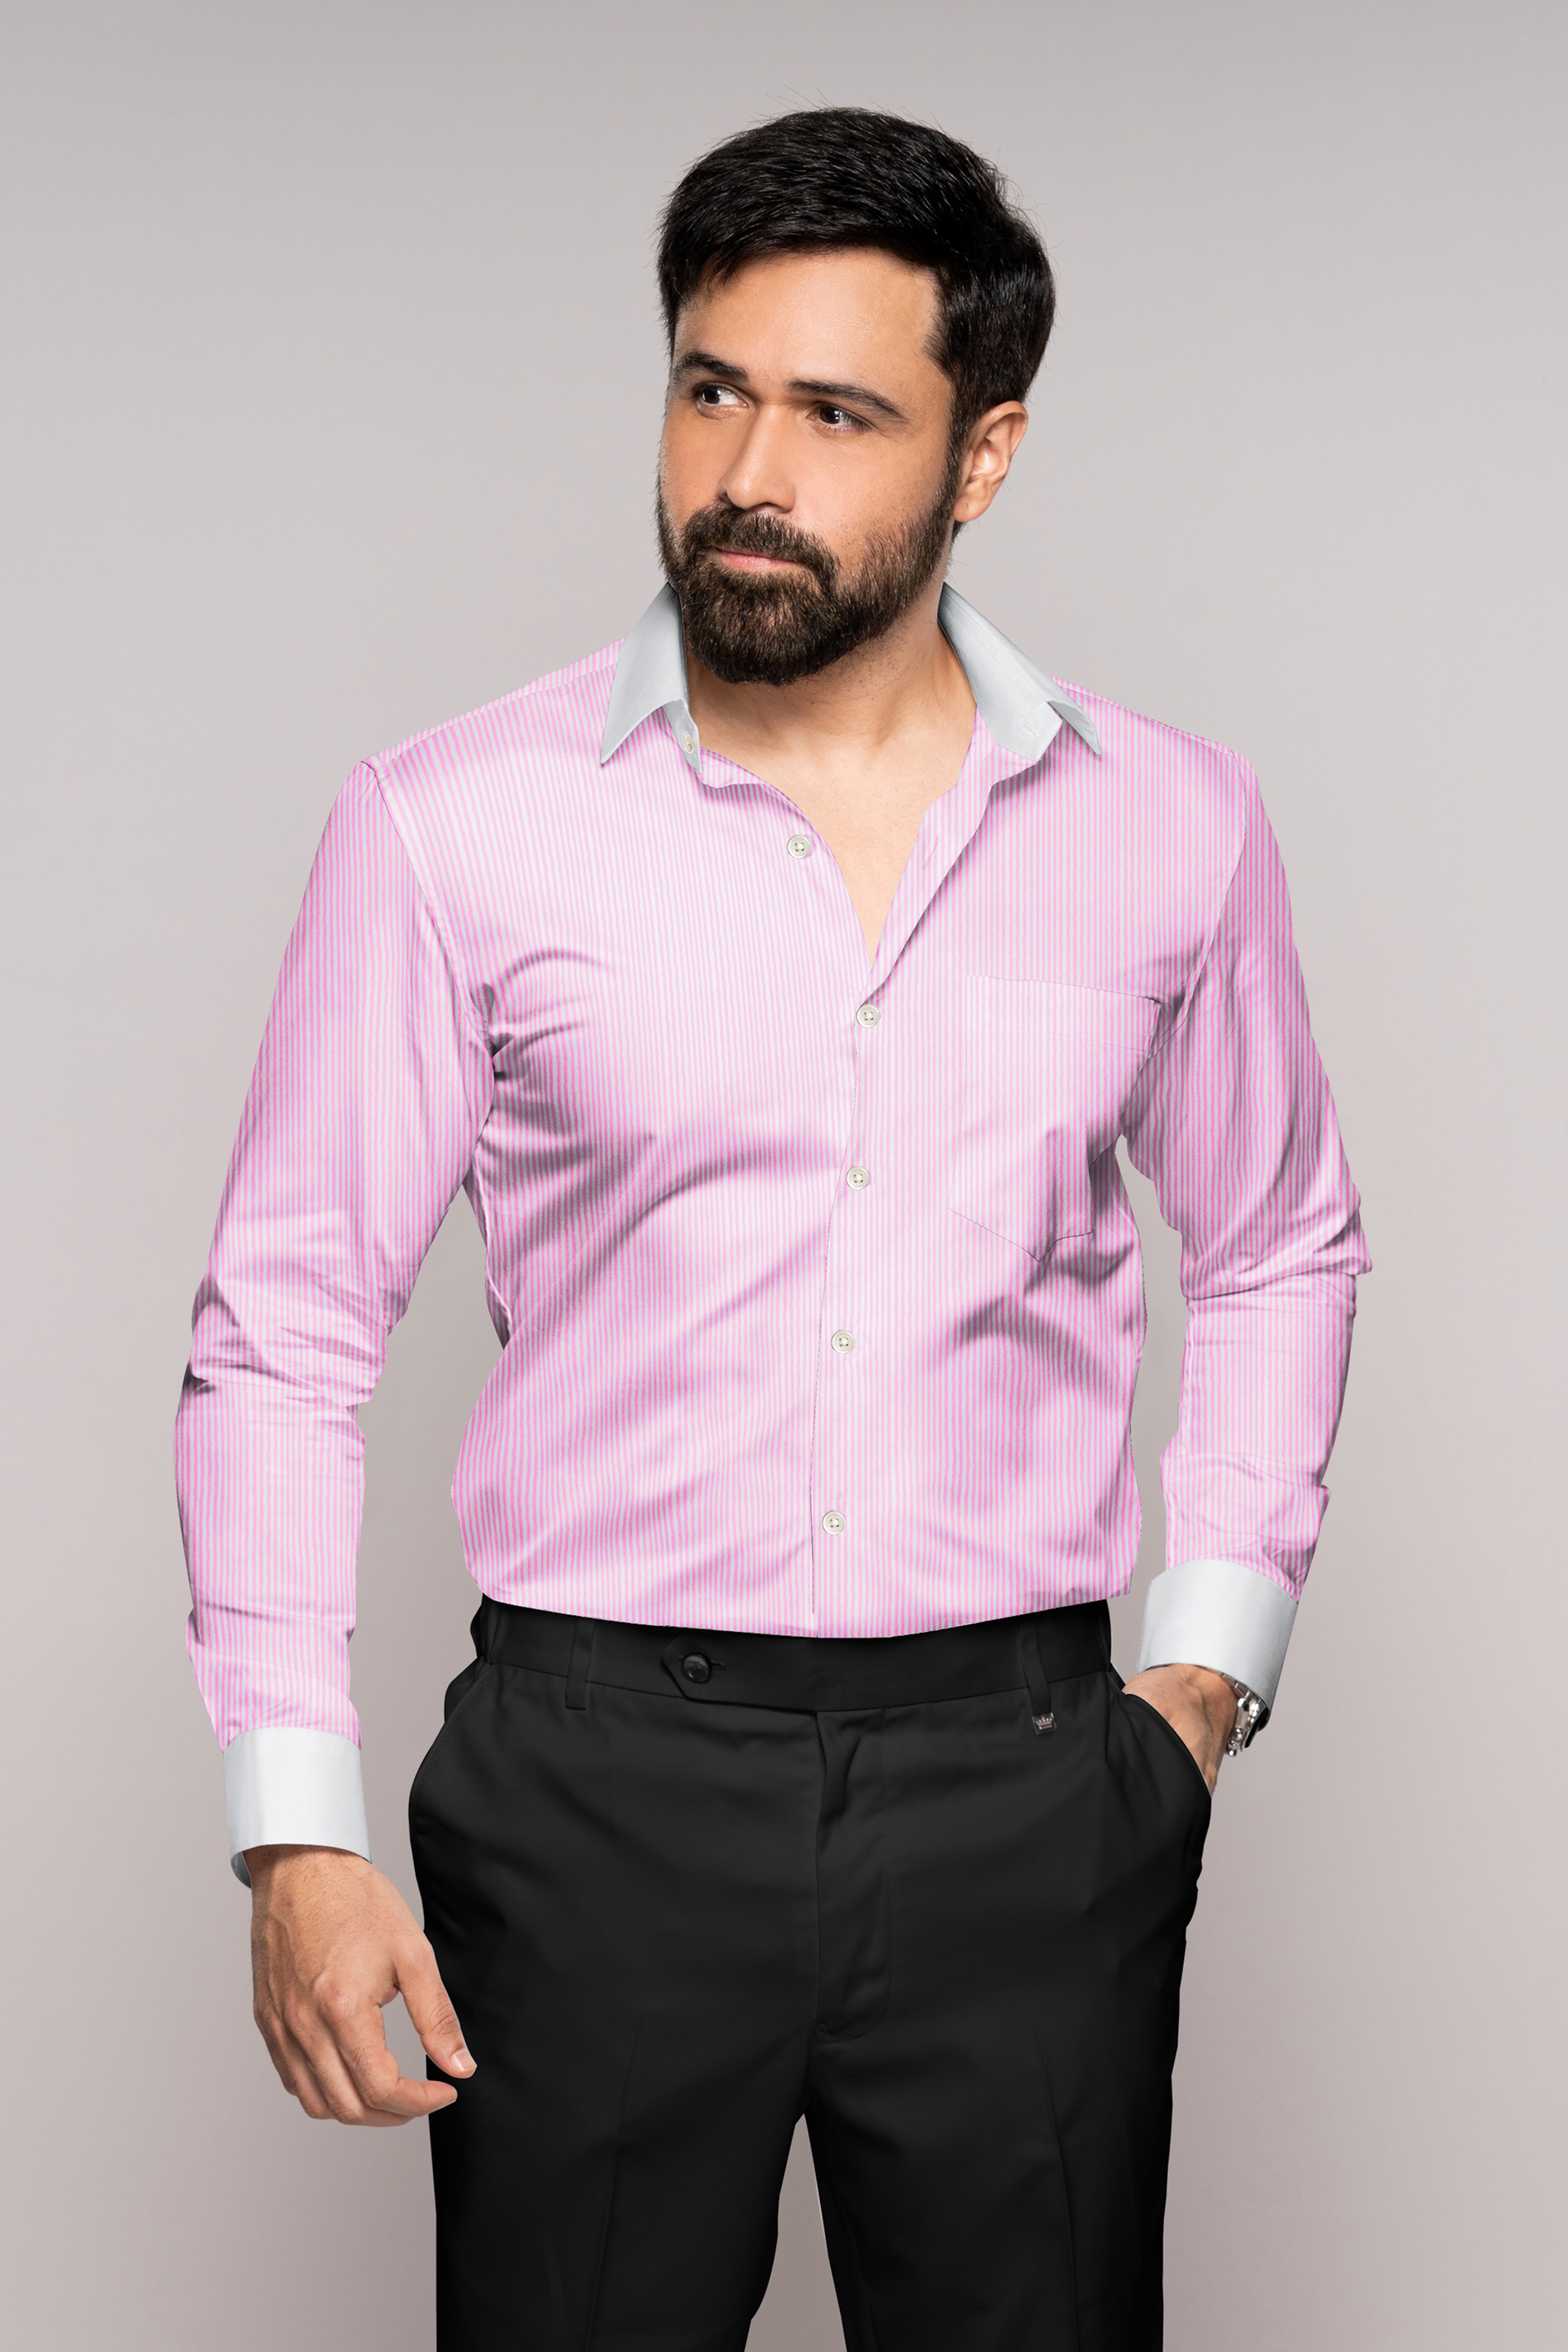 Melanie Pink and White Striped with White Cuffs and Collar Premium Cotton Shirt